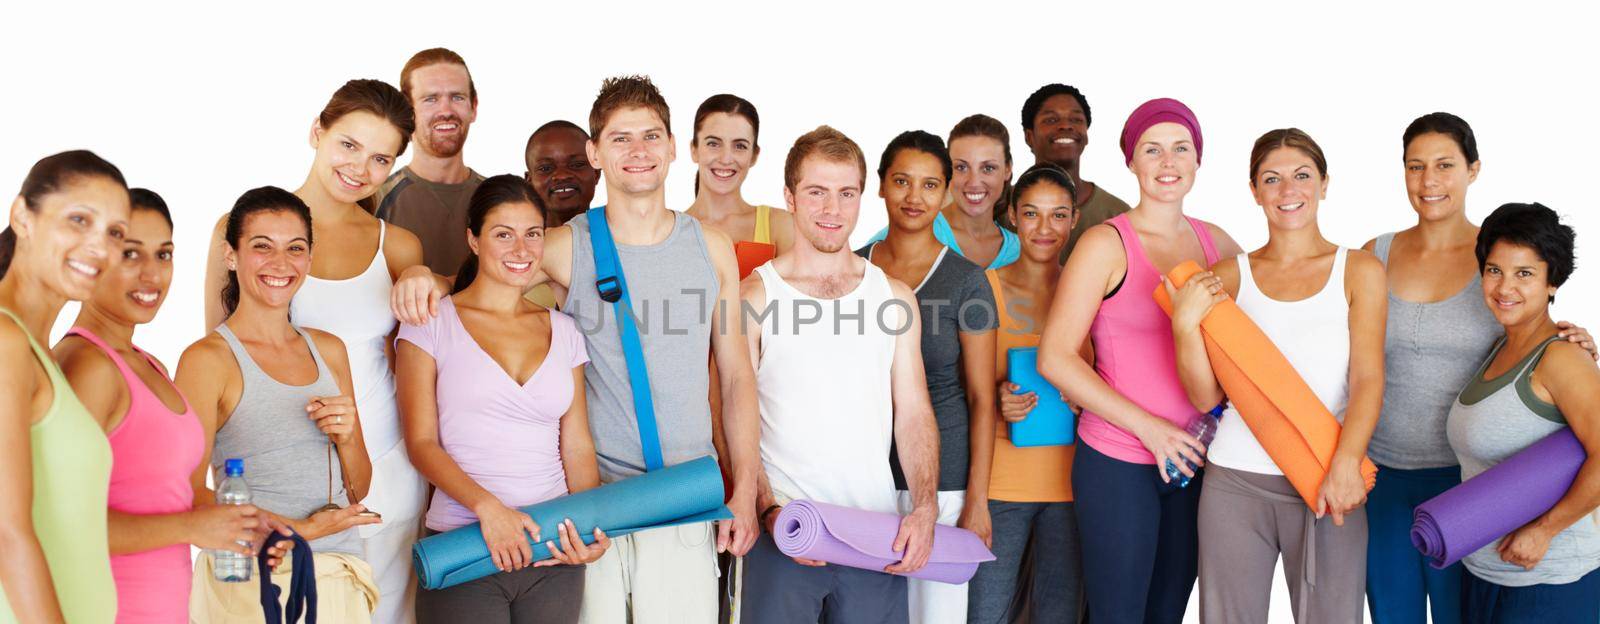 Yoga class in isolation. Portrait of a group of yoga enthusiasts isolated on white